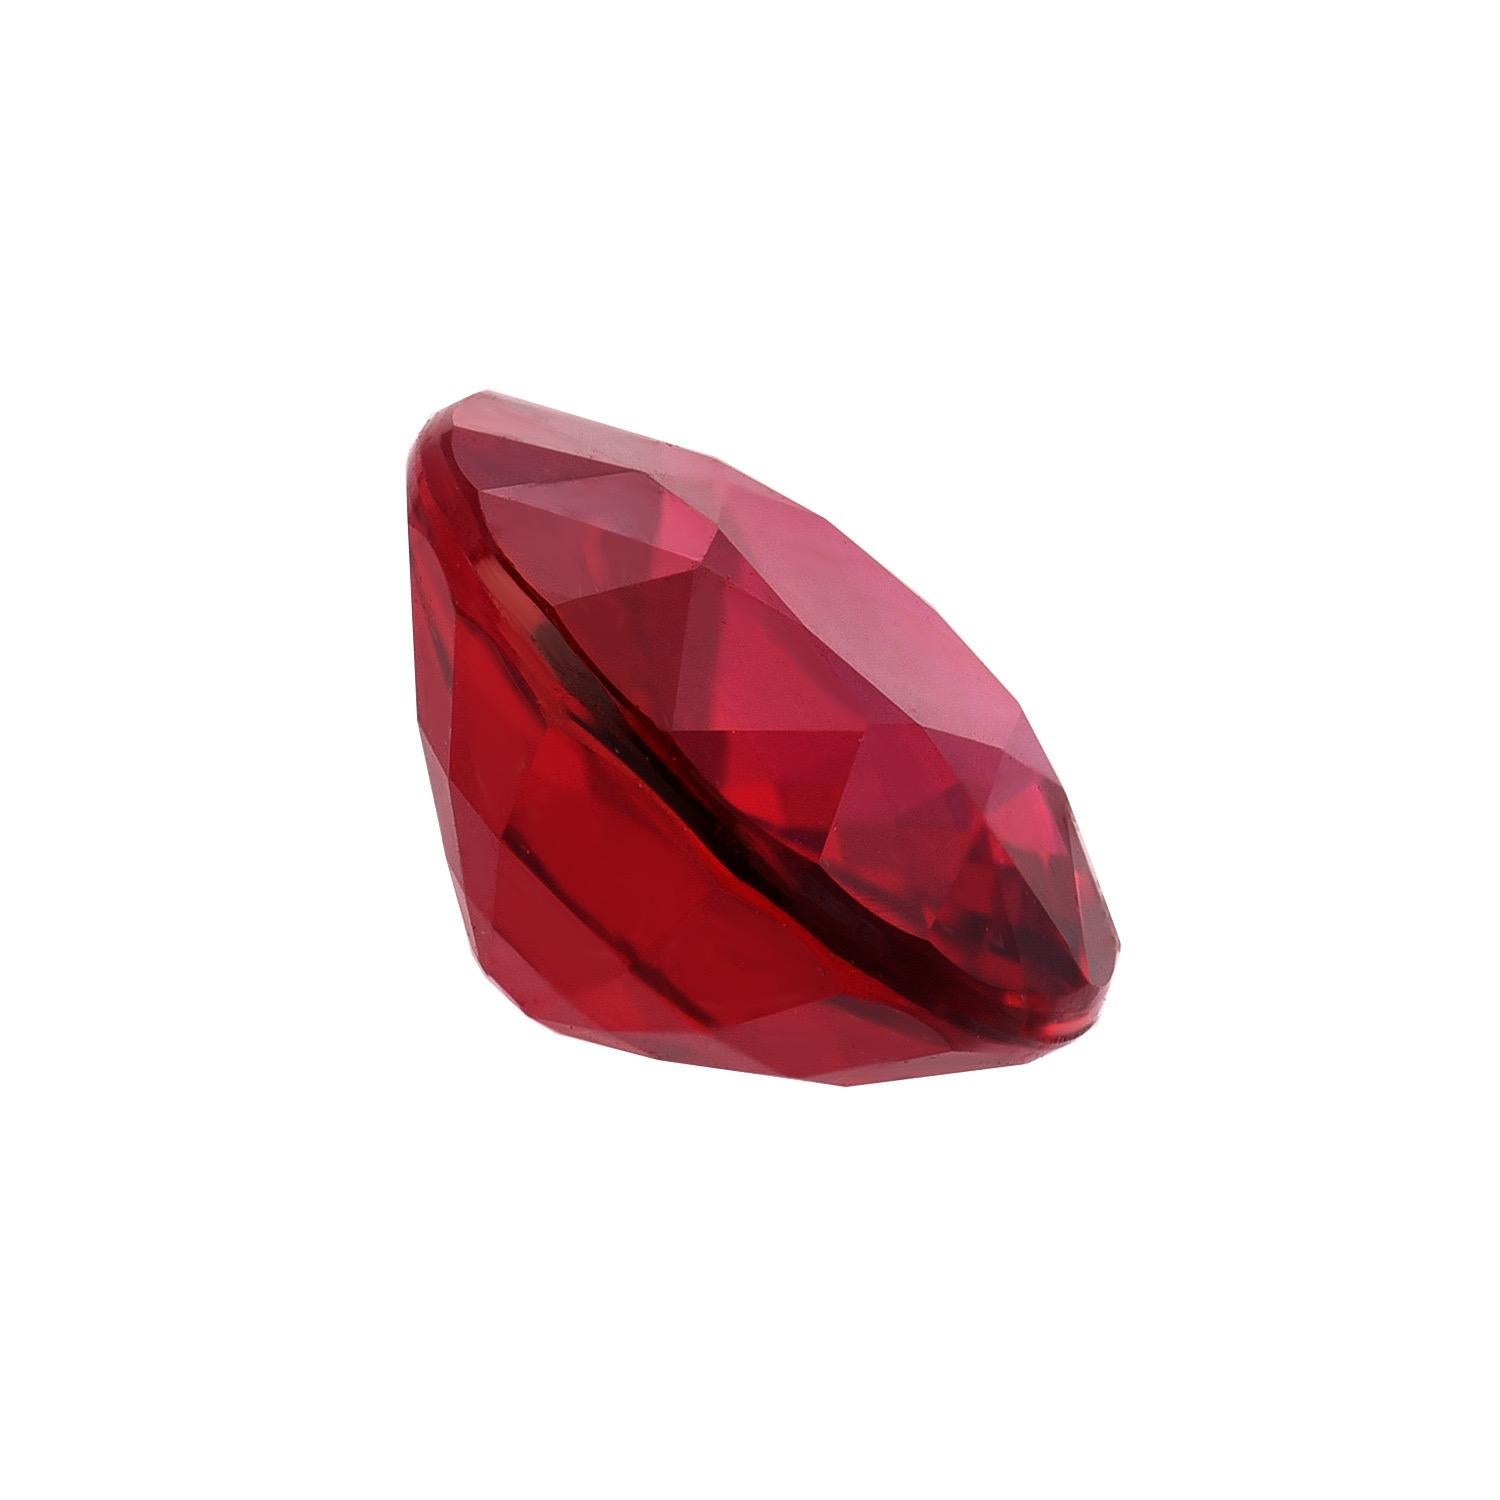 Exceedingly rare, vibrant and ultra fine, 4.32 carat natural, no heat “pigeon blood” Ruby oval gem, offered unmounted to a sophisticated gemstone collector. This Ruby is “loupe clean” and exceptional on all levels.  
The SSEF and Gubelin gem